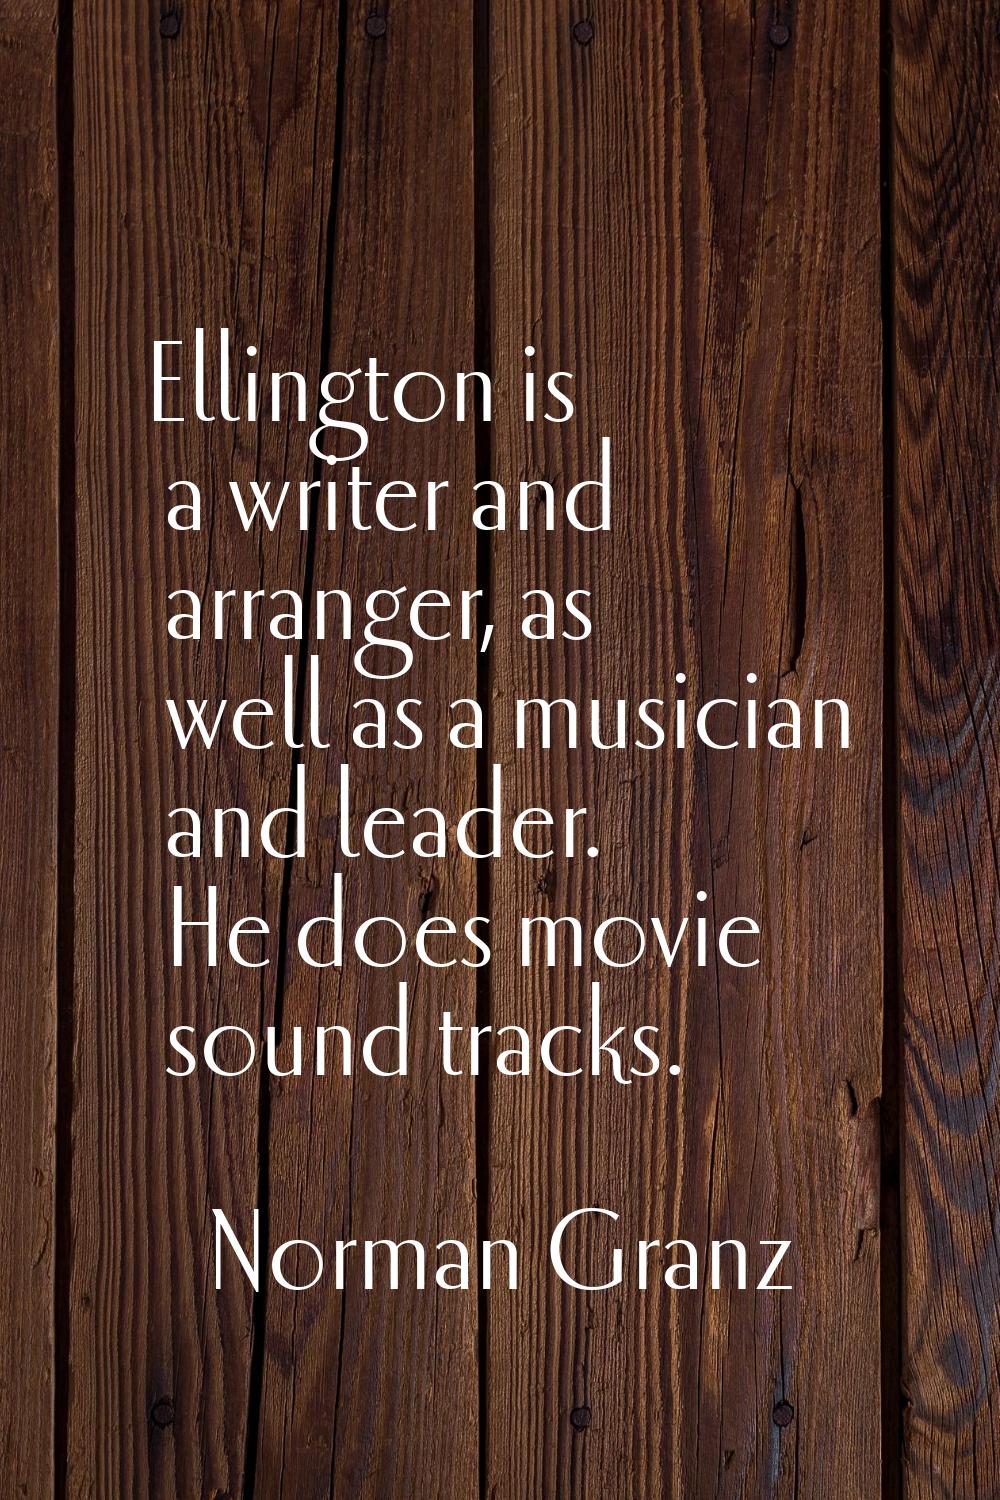 Ellington is a writer and arranger, as well as a musician and leader. He does movie sound tracks.